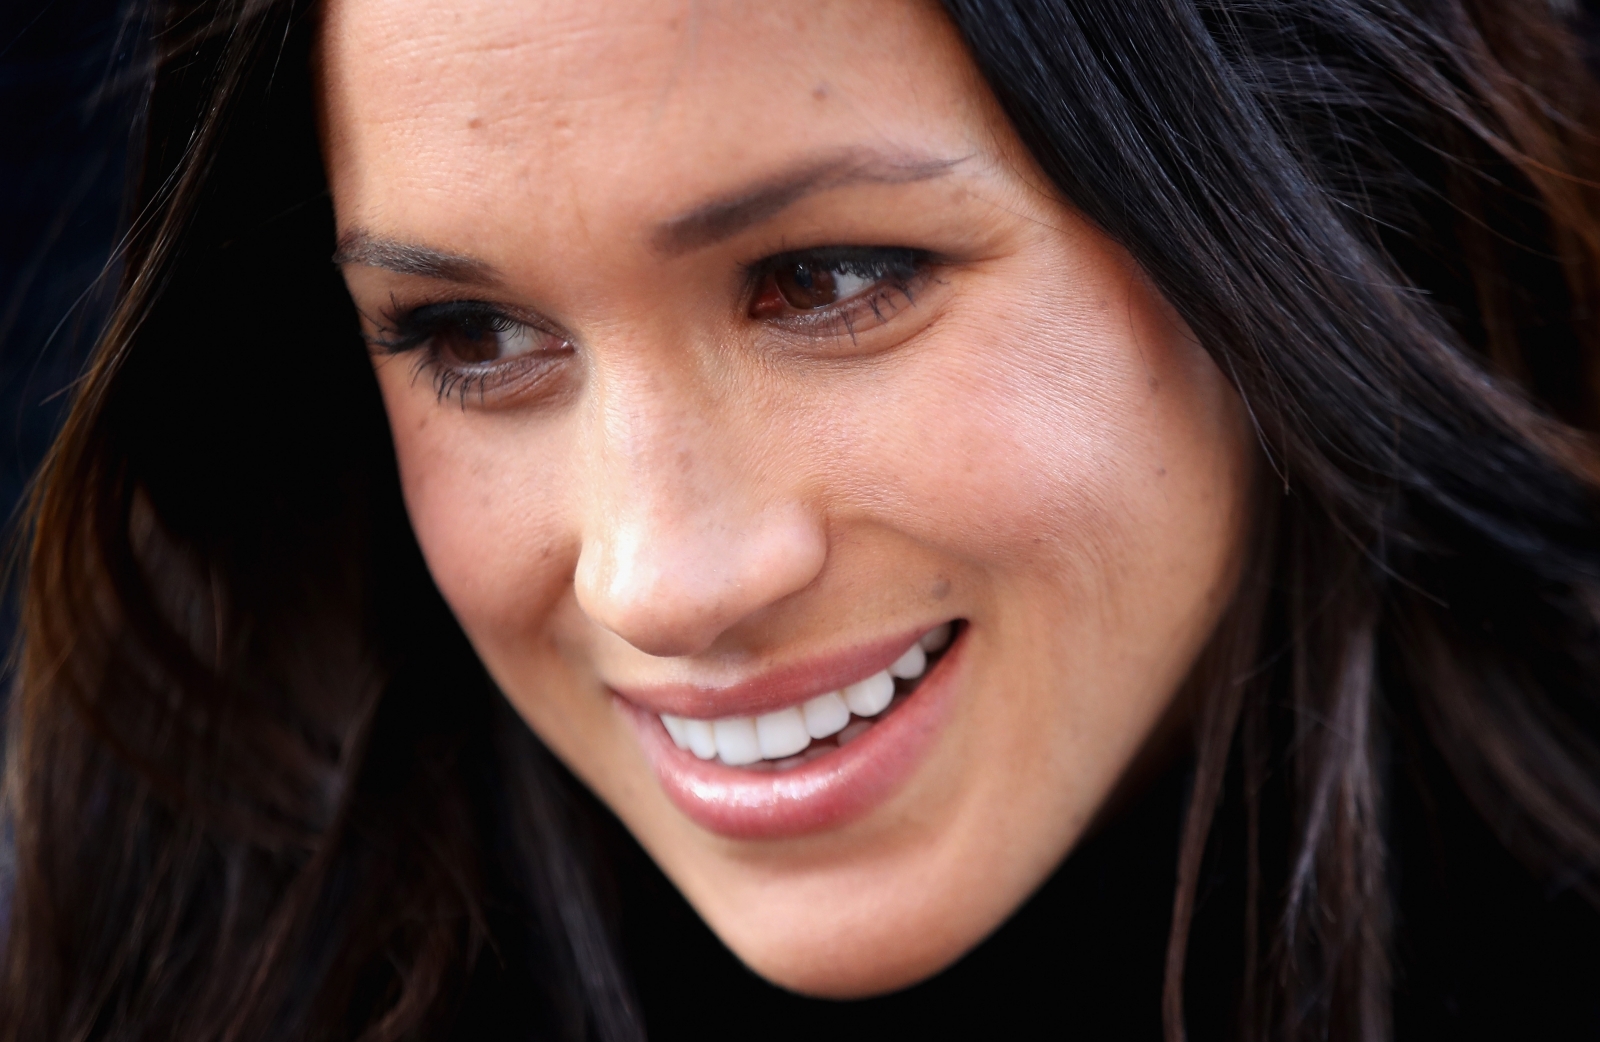 Meghan Markle's nose: Why it is so popular and how much will it cost you?